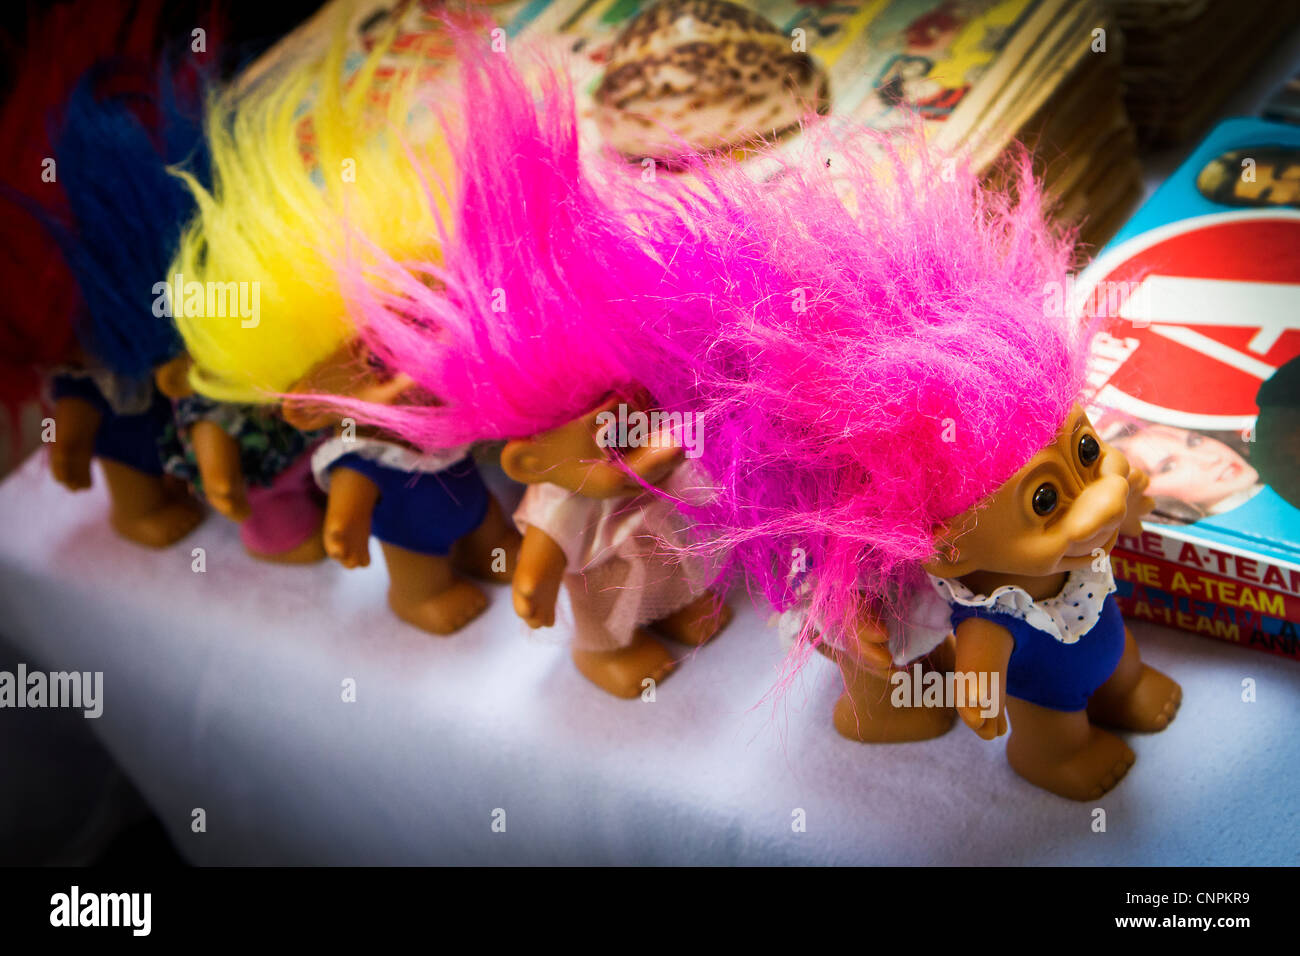 Colorful Troll dolls on sale in an antique market at Warrington. Trolls of this type were a popular fad during the 1960s Stock Photo